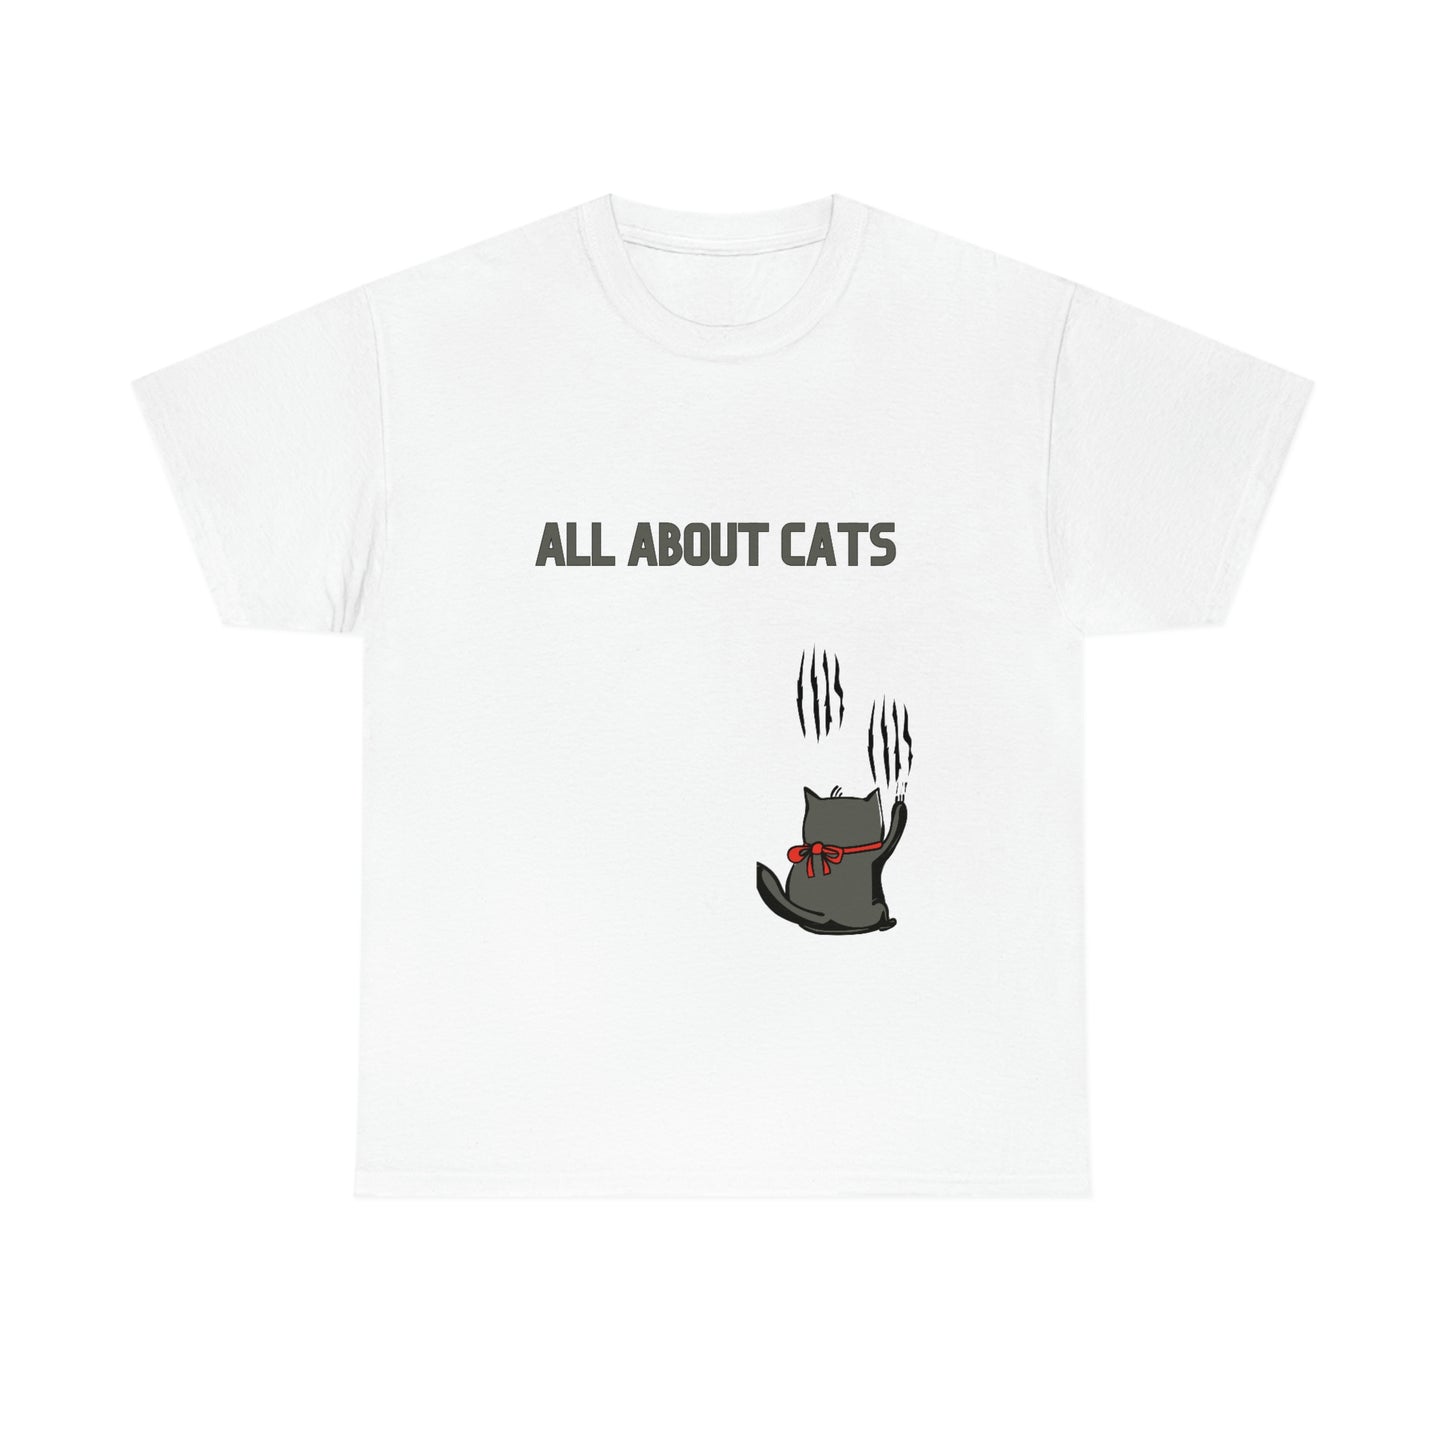 All About Cats Cat Scratches design Graphic tee shirt